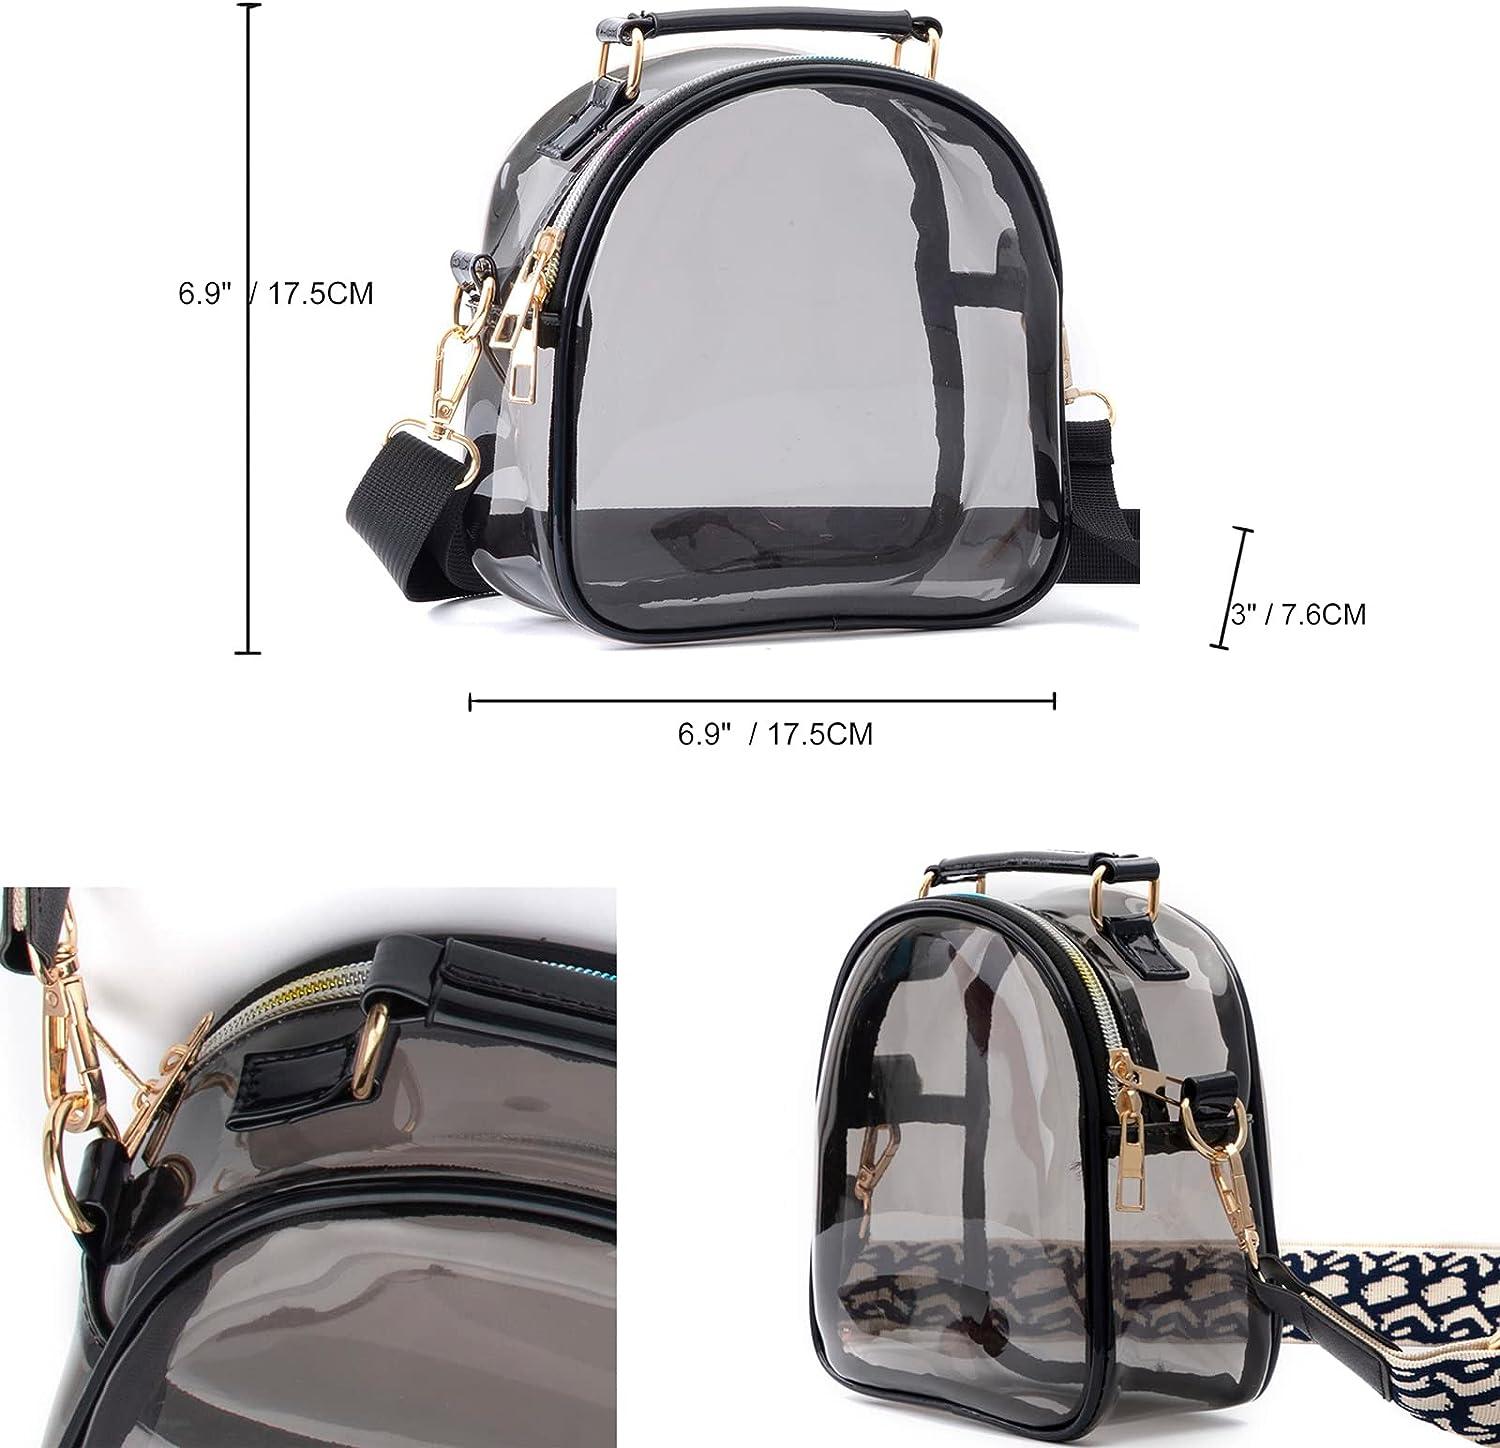 UEOE Clear Purse for Women, Cute Crossbody transparent Bag Stadium  Approved, See Through PVC Bag with 2 Shoulder Straps Transparent Black